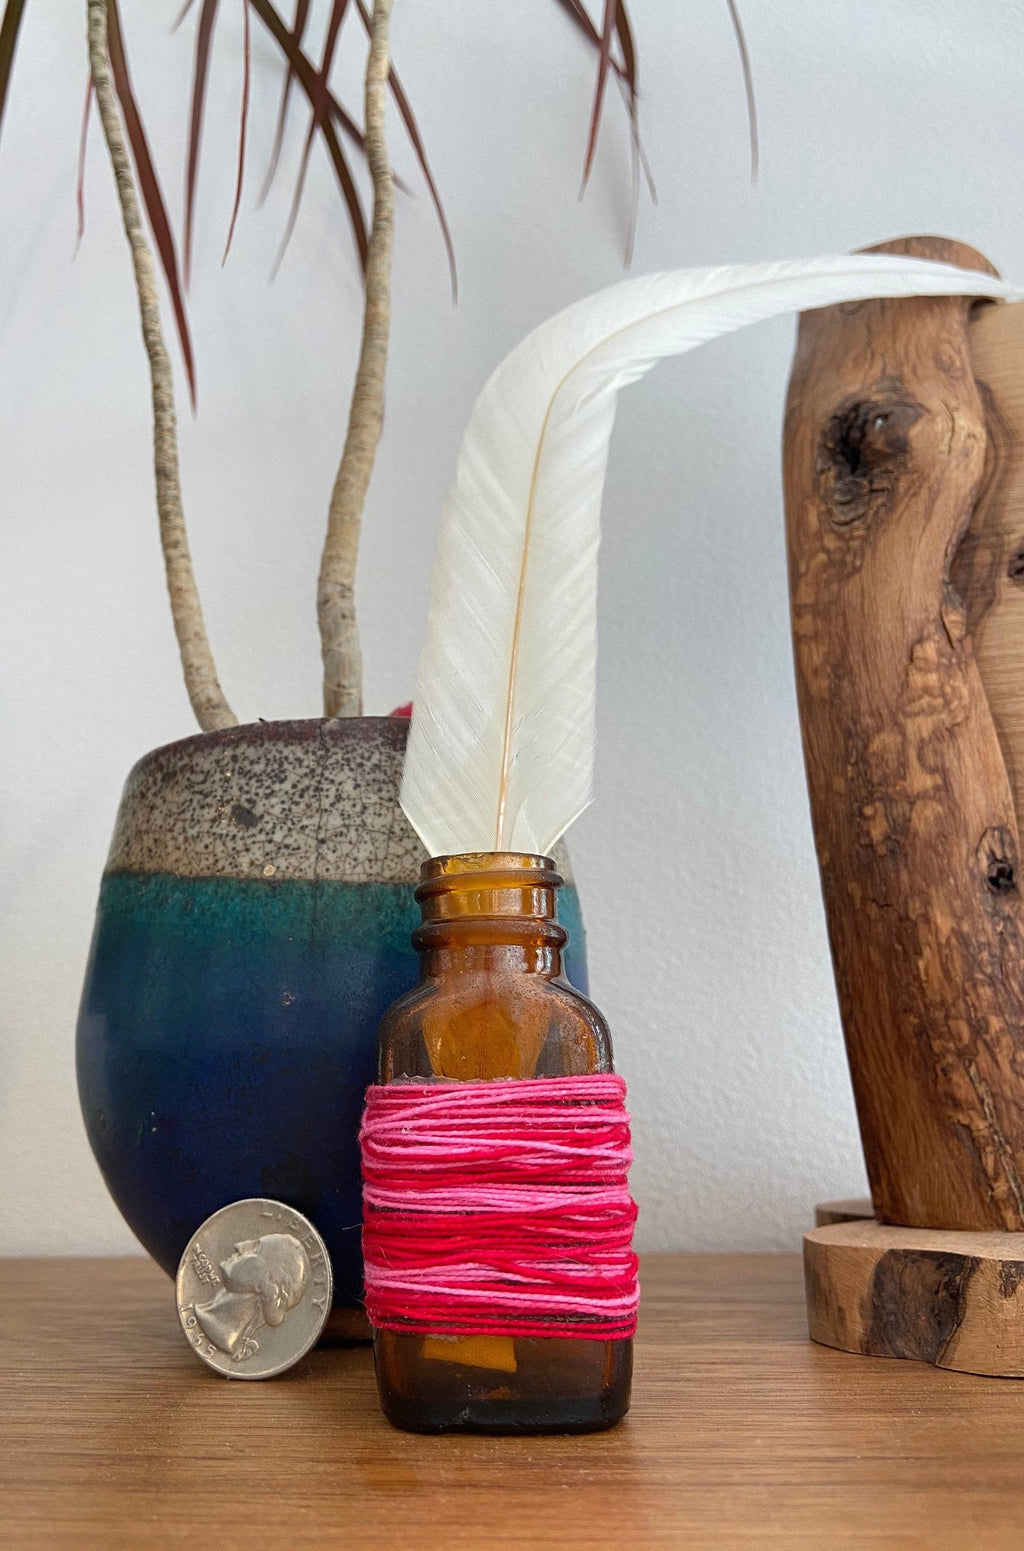 Antique apothecary bottle, Bud vase, string wrapped, boho gift, found objects on beach, pink and red, amber glass